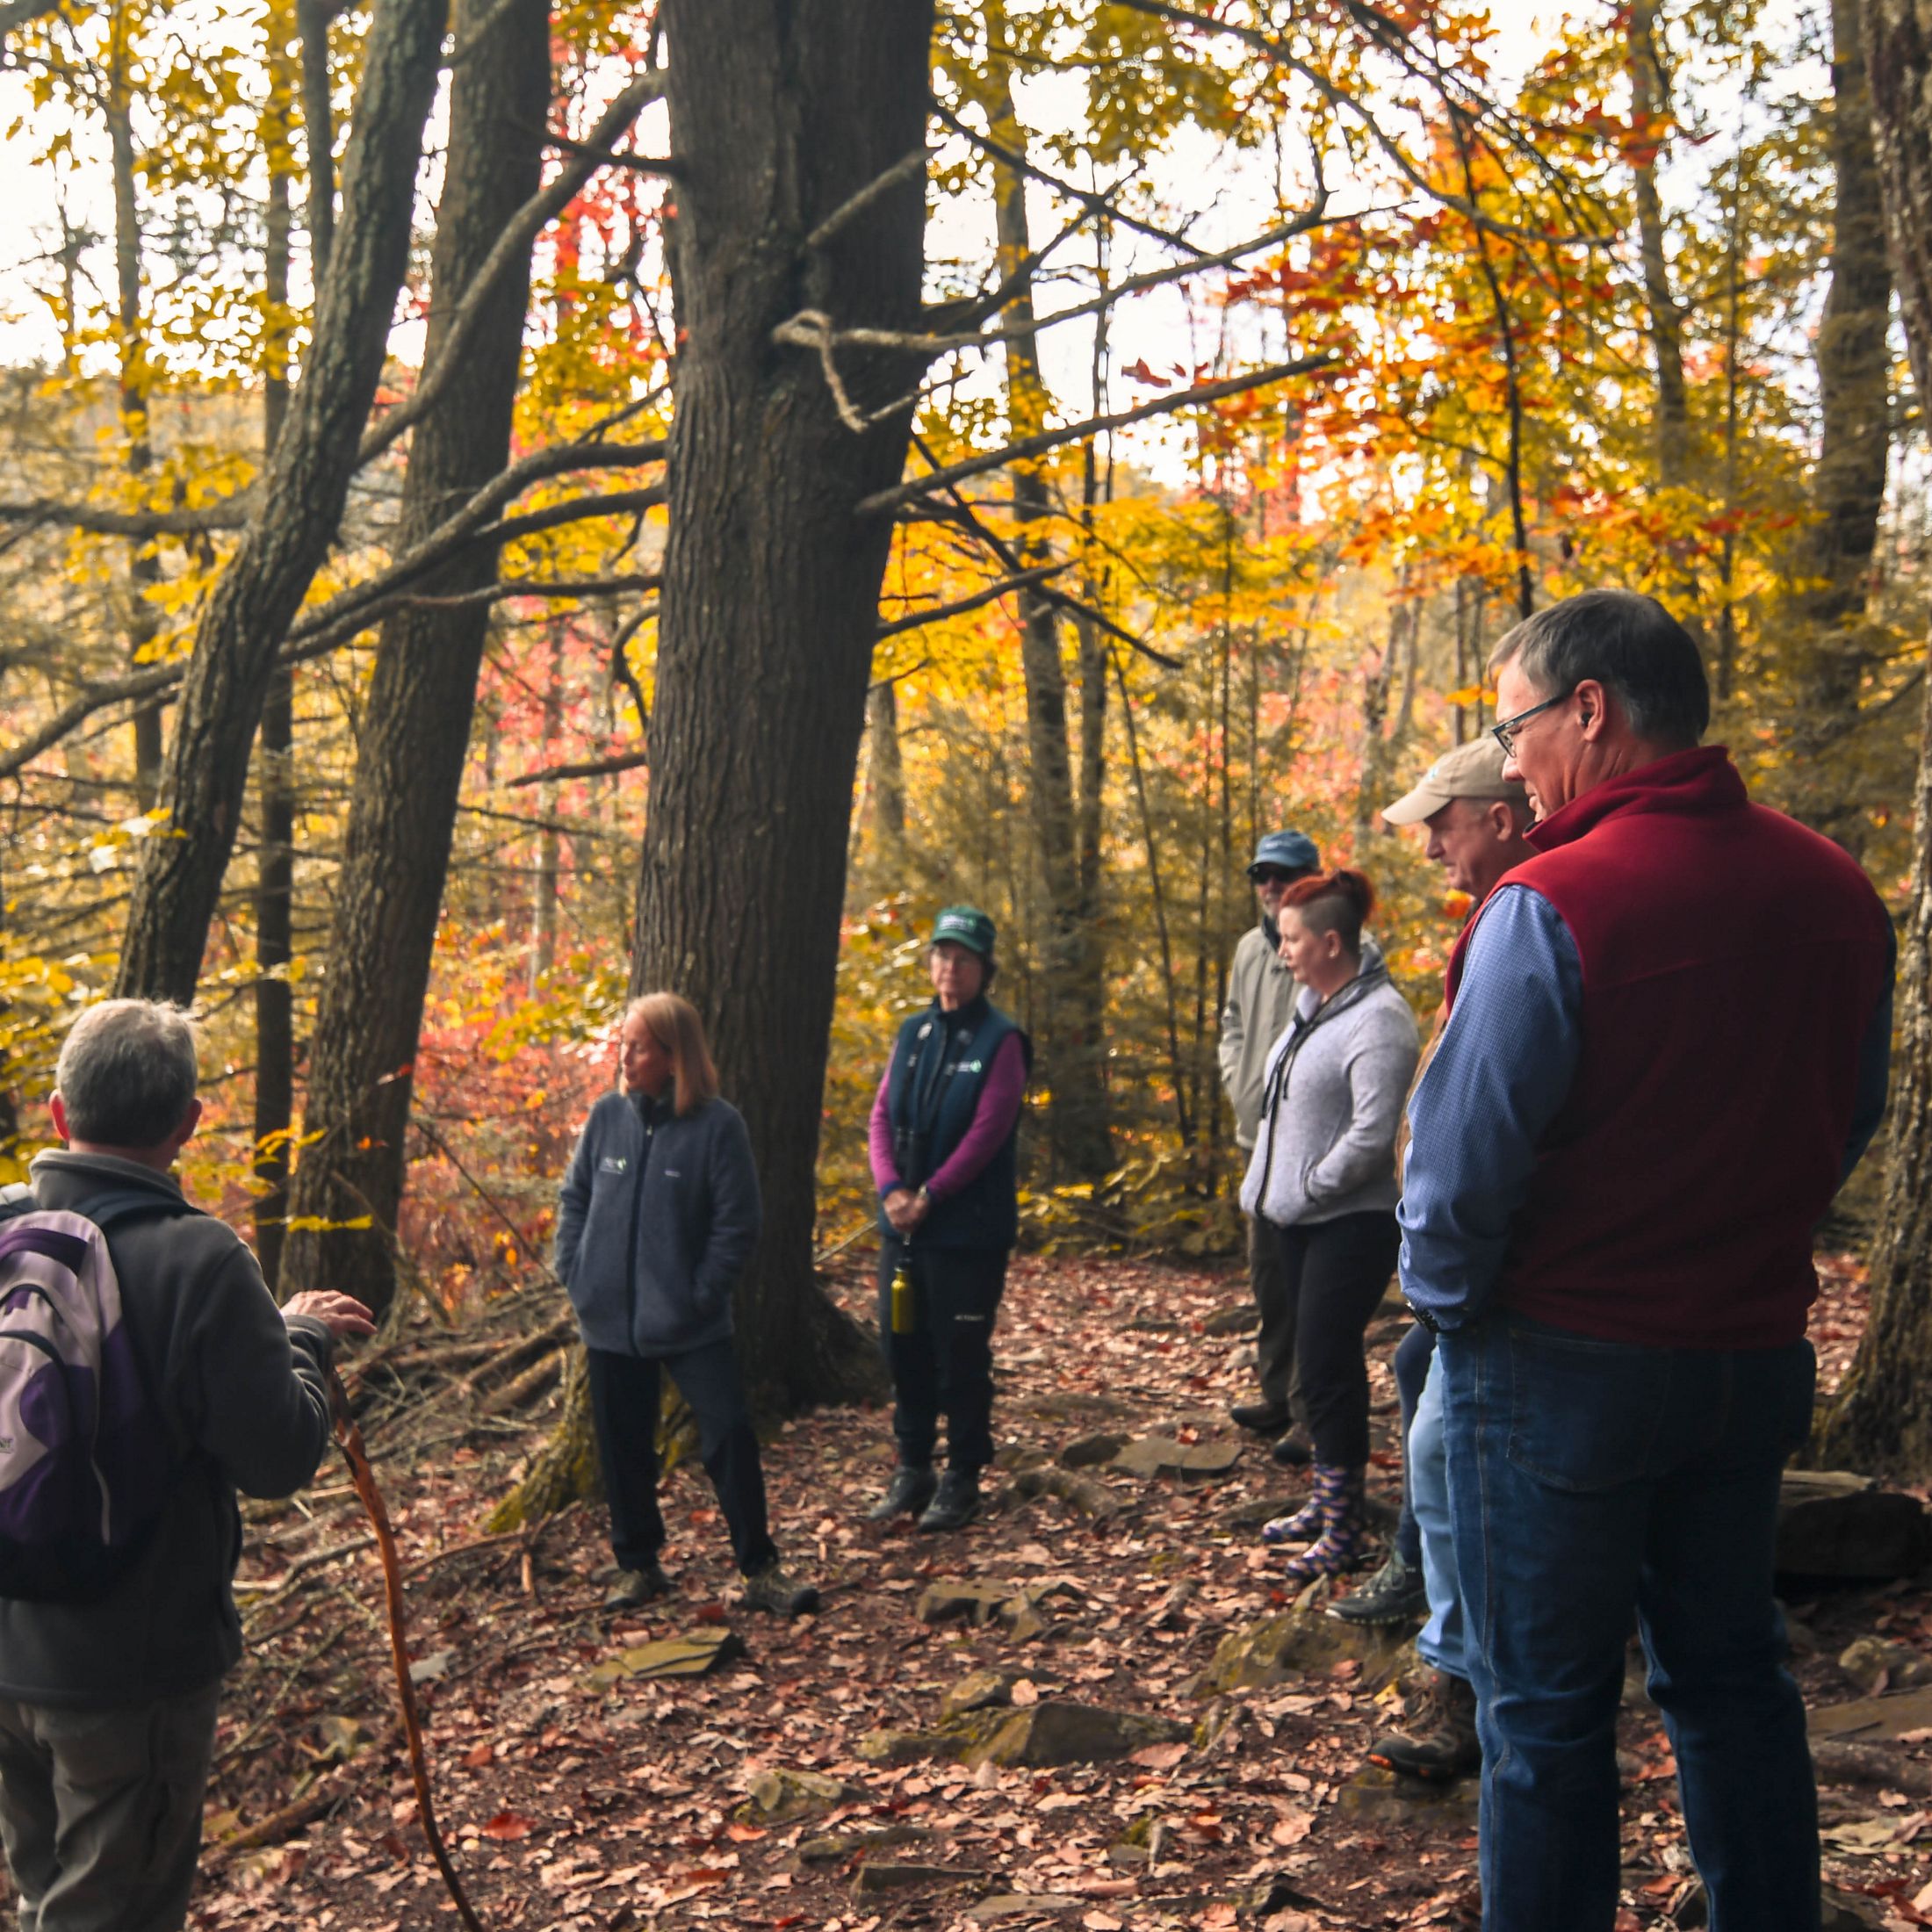 Several people stand in the middle of a forest surrounded by fall foliage, looking off into the distance. 